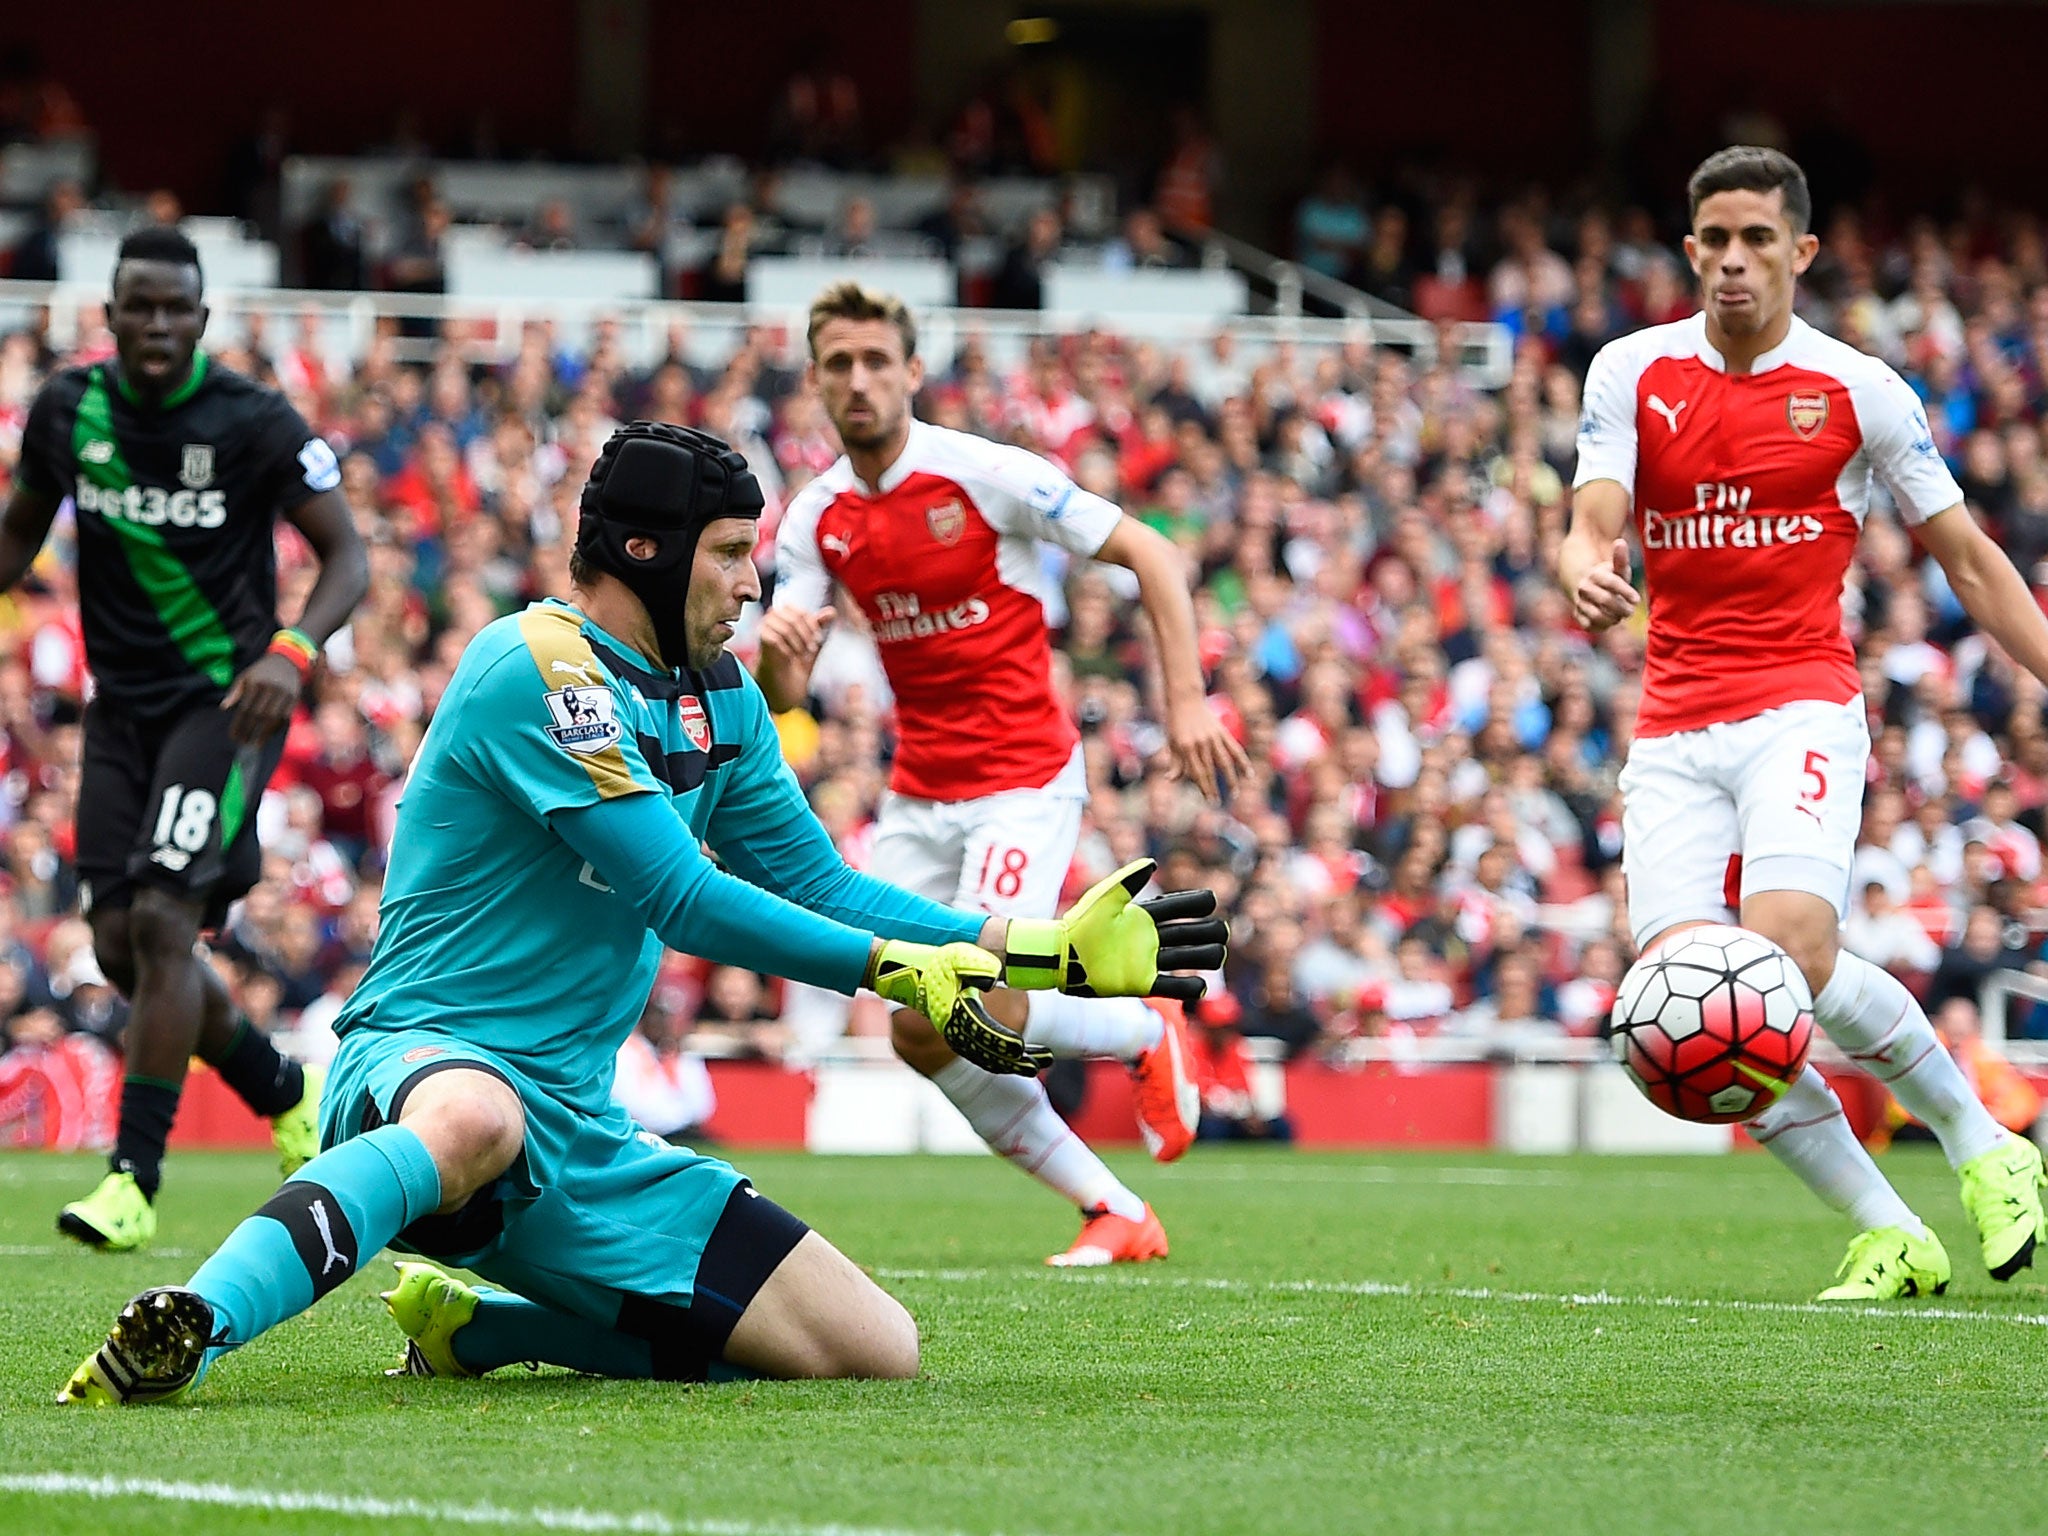 &#13;
Petr Cech was Arsenal's only summer signing&#13;